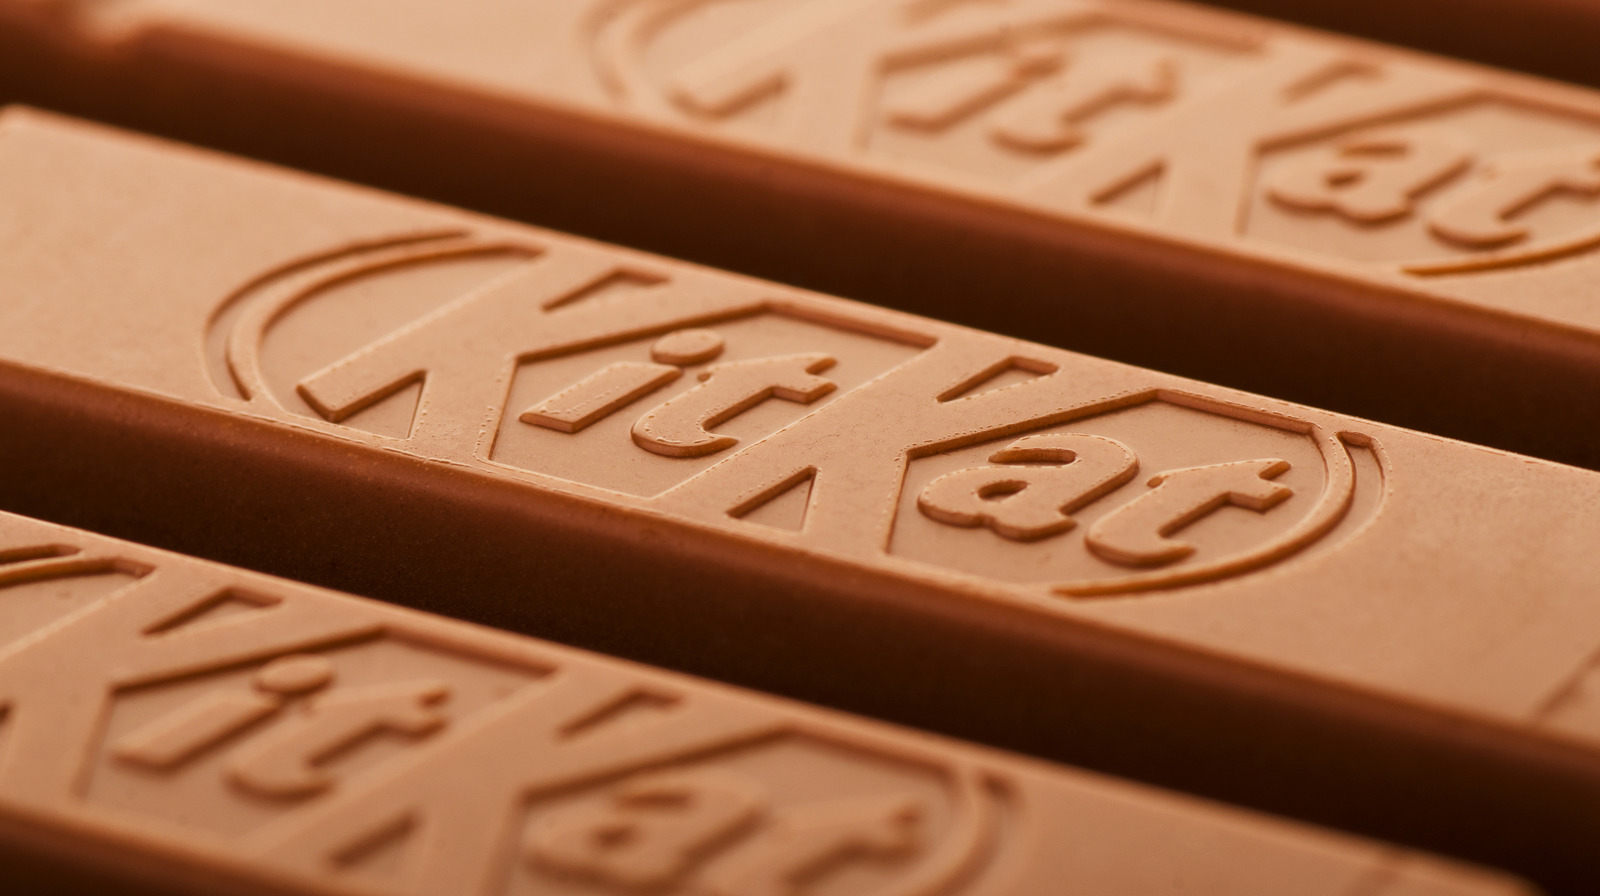 The Complete List Of Kit Kat Flavors, Ranked